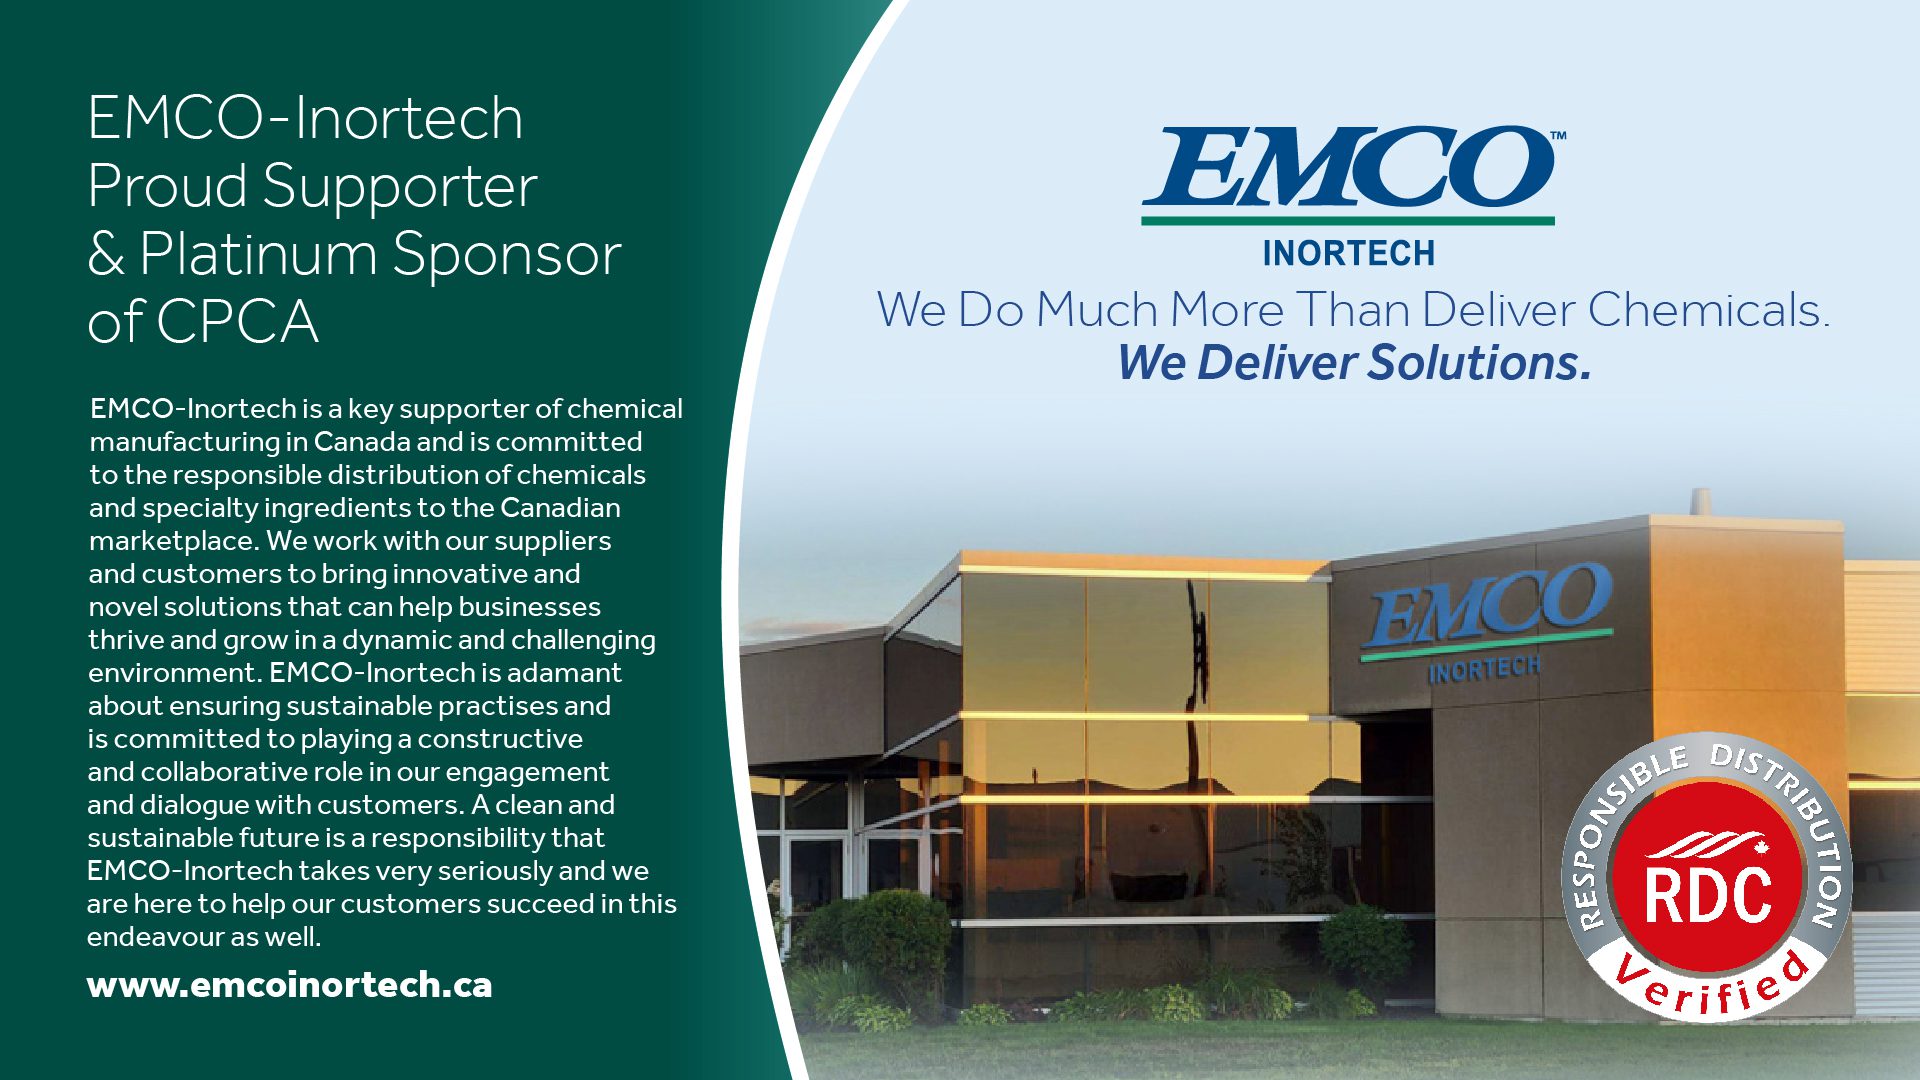 EMCO_Inortech - We Deliver Solutions